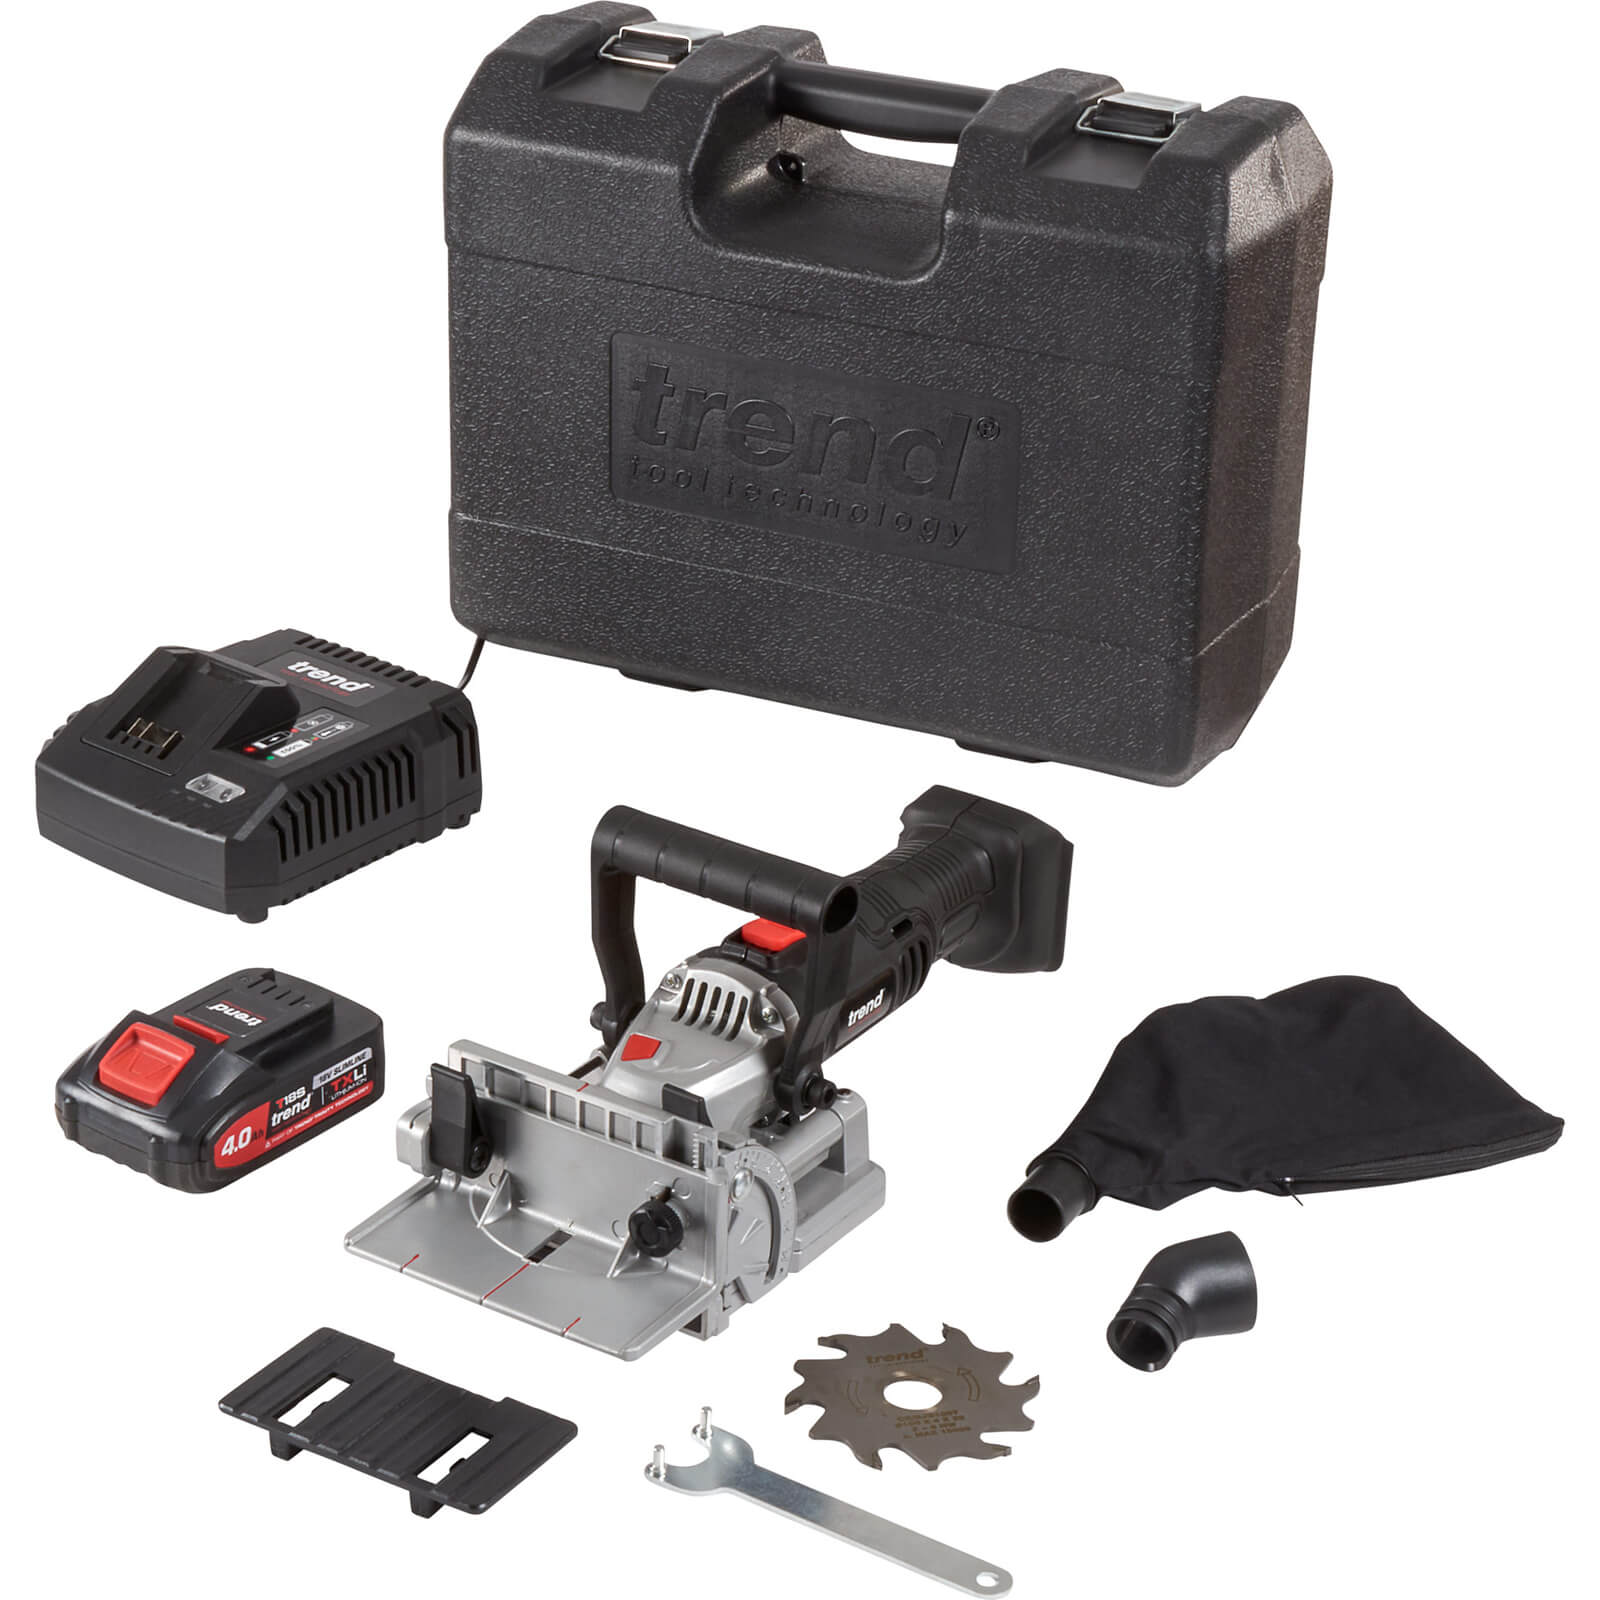 Image of Trend T18S/BJK 18v Cordless Biscuit Jointer 1 x 2ah Li-ion Charger Case